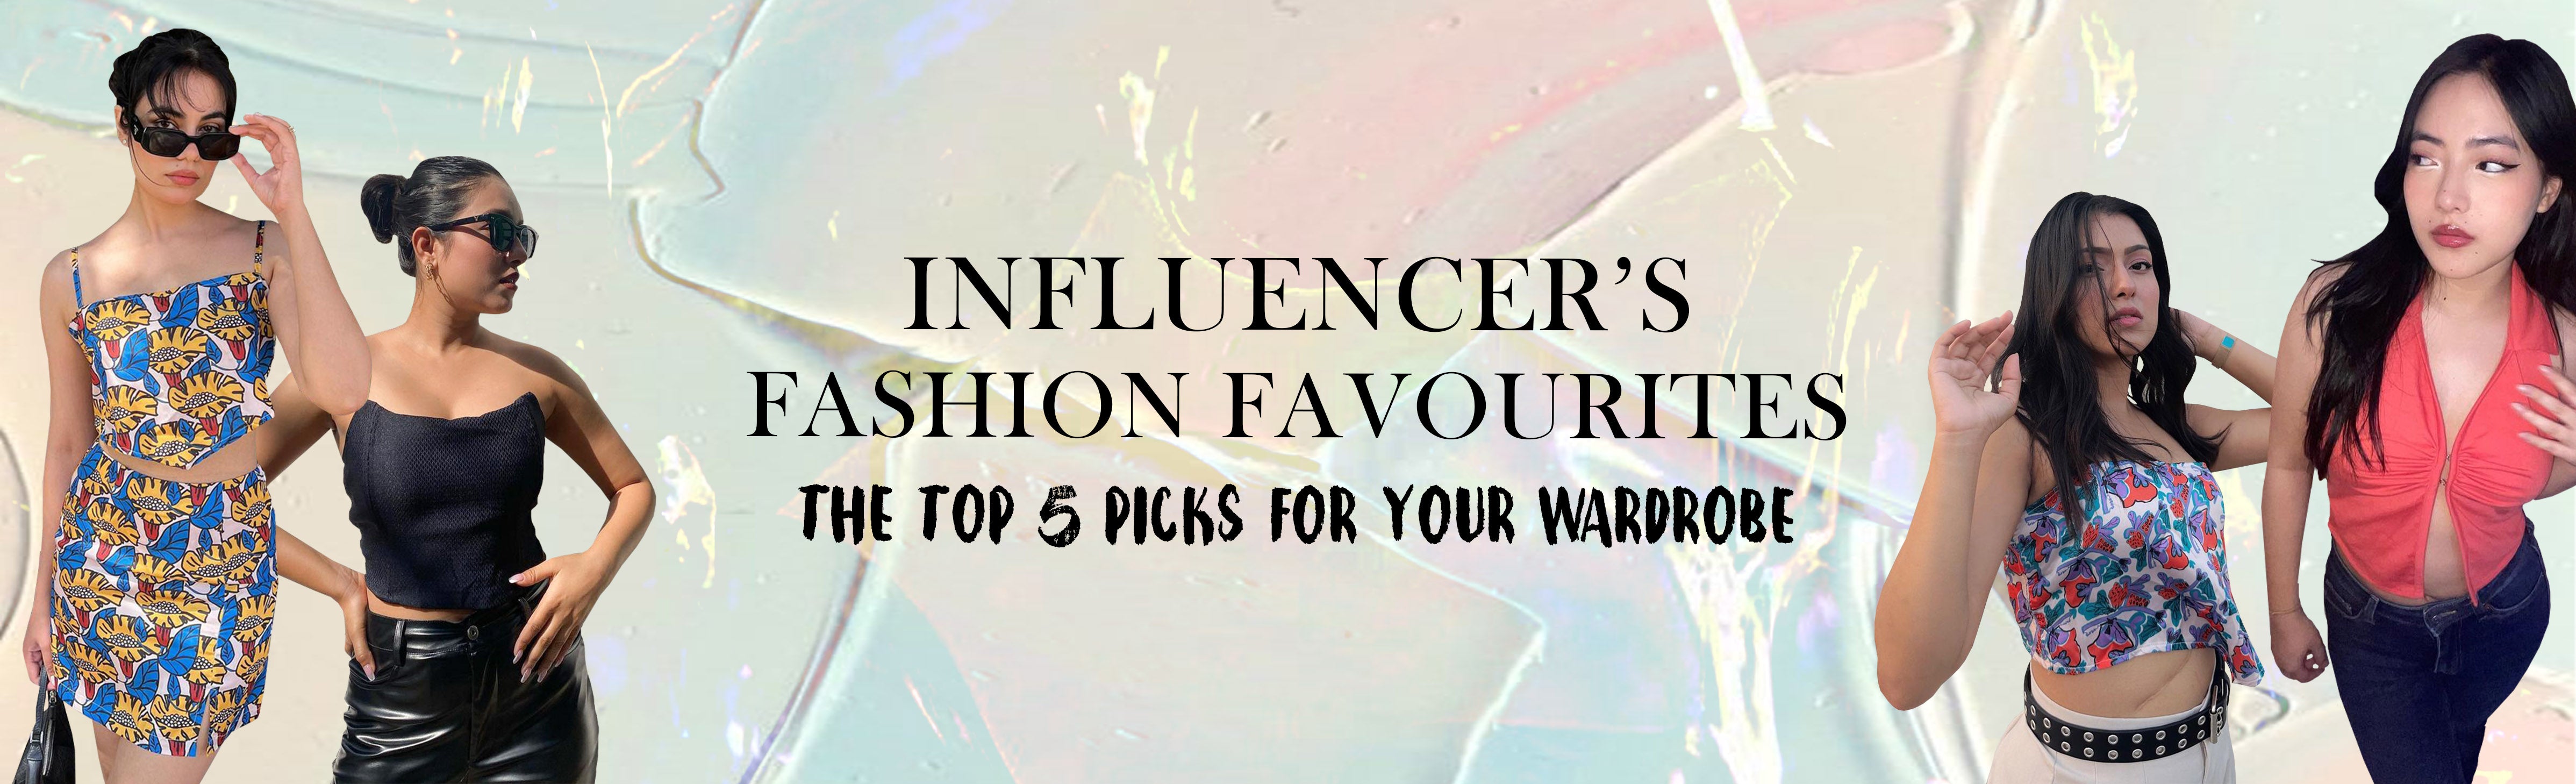 Influencer’s Fashion Favourites: The Top 5 Picks for Your Wardrobe